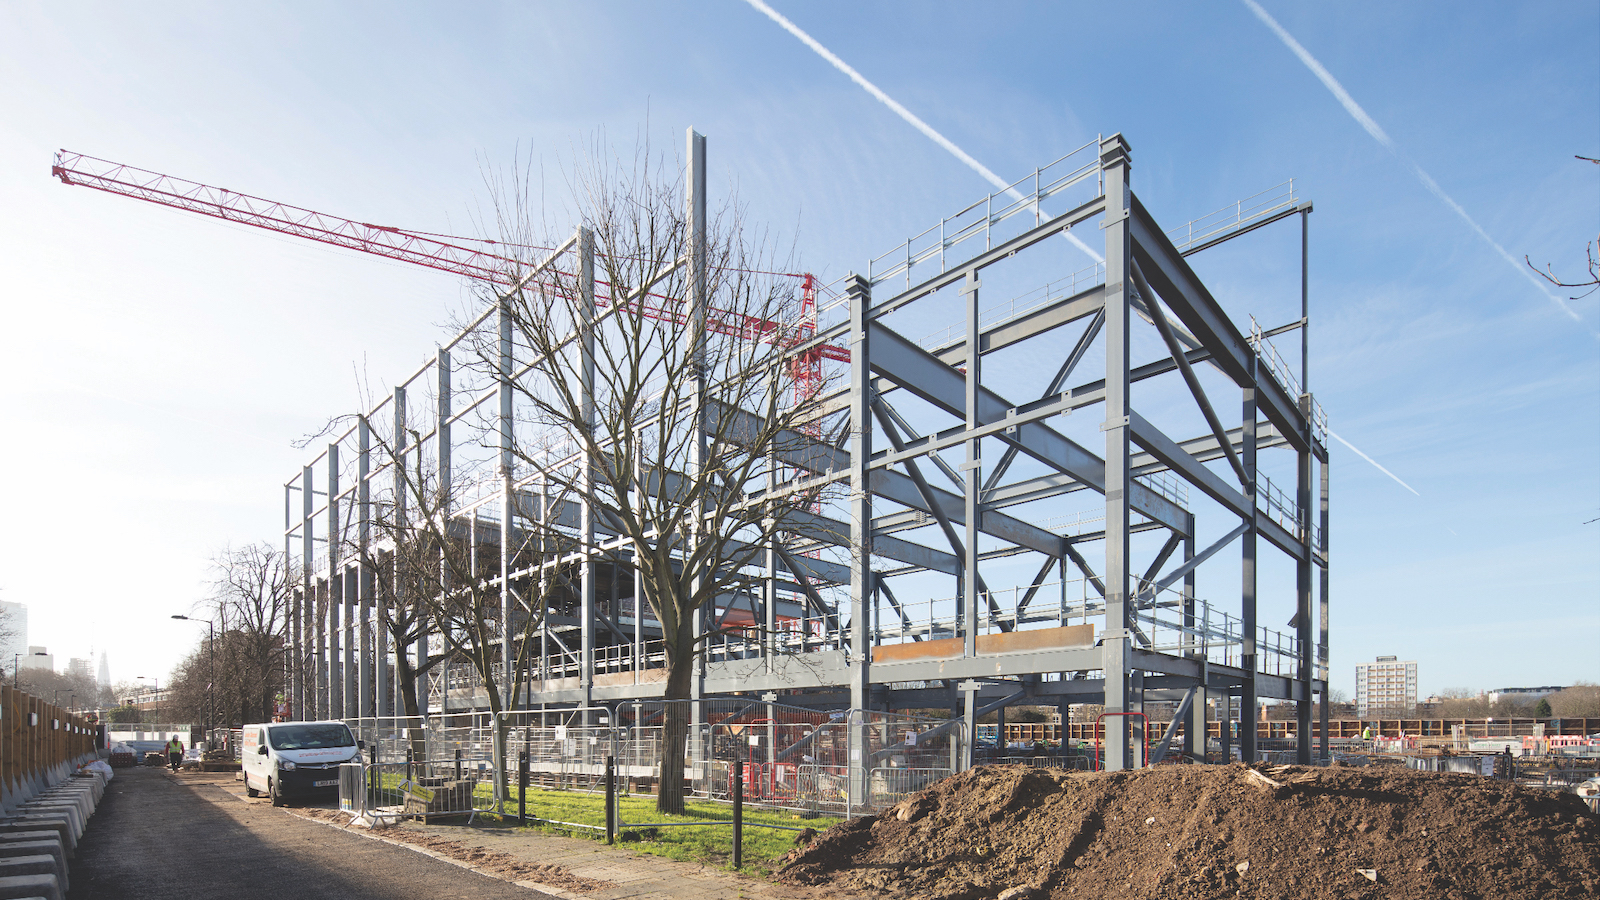 The Britannia Leisure Centre and adjoining City of London Academy are being delivered by Morgan Sindall on a tight site in Hackney. An efficient structural design has maximised space on the limited footprint bordering Shoreditch Park, with some 2,200 tonnes of steelwork erected for both buildings by fabricator Severfield. Photo supplied by New Steel Construction